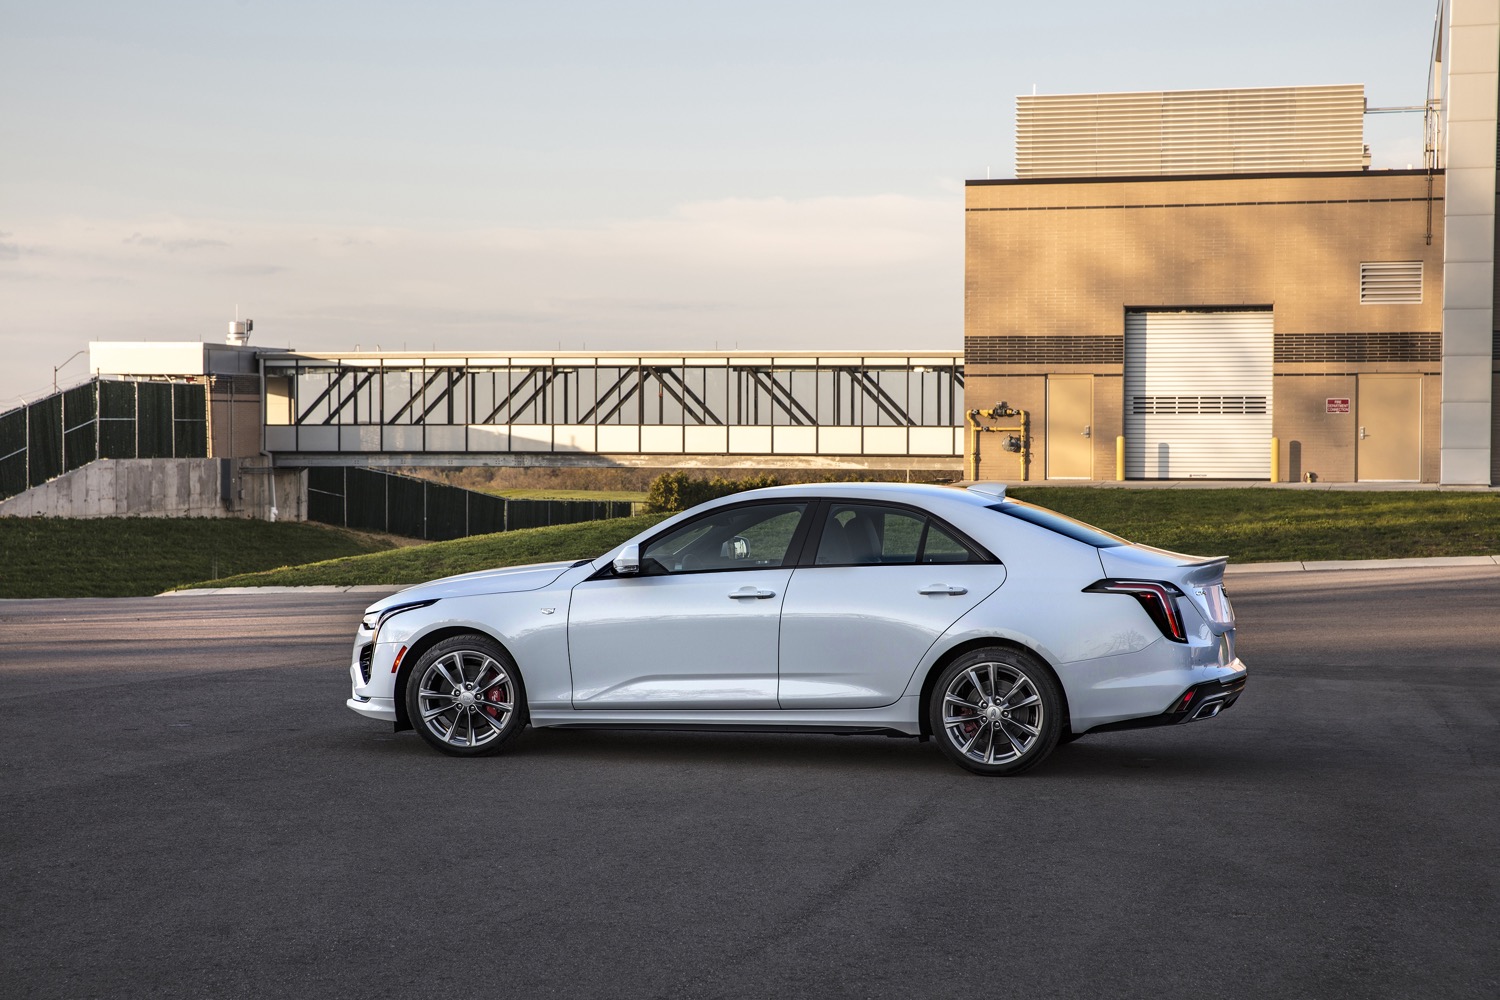 2020 Cadillac CT4, CT5 Recalled for Incorrect Emissions Control Label